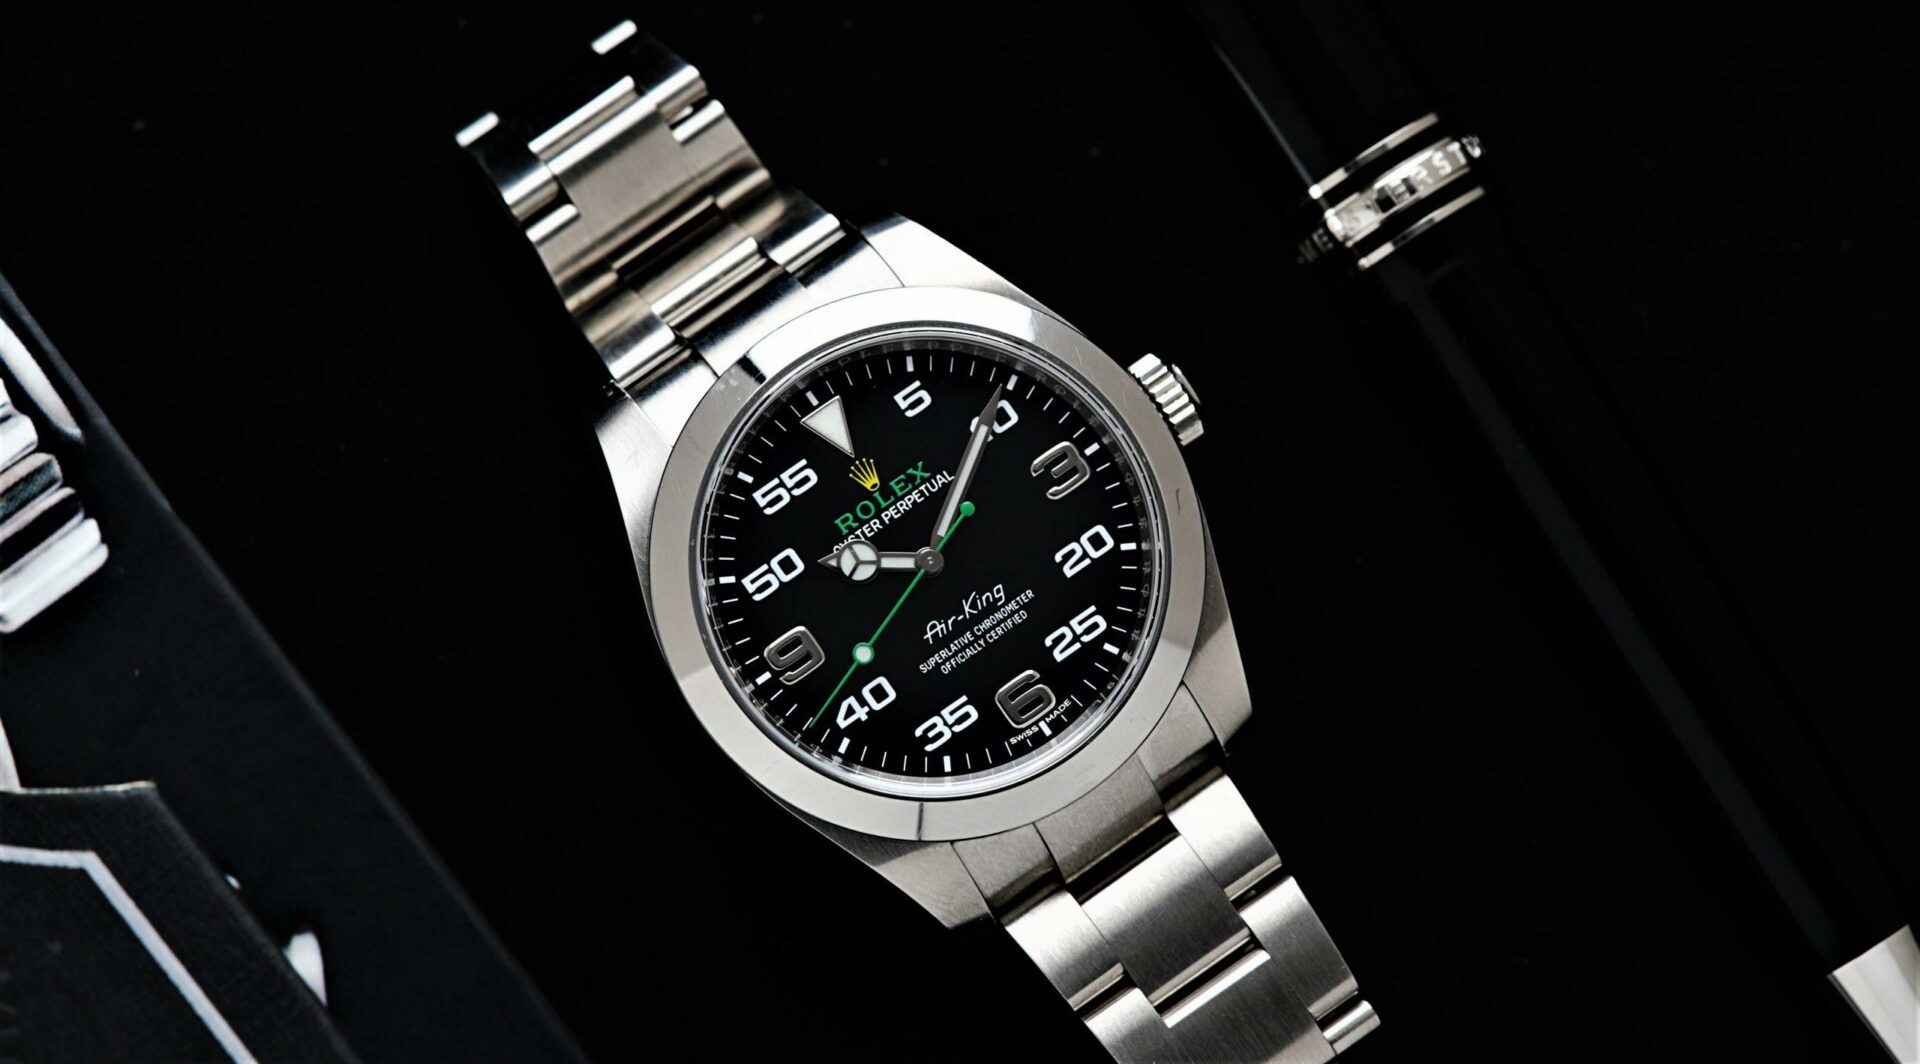 Rolex Air King Gen 1 watch pictured on an angle under white lighting.